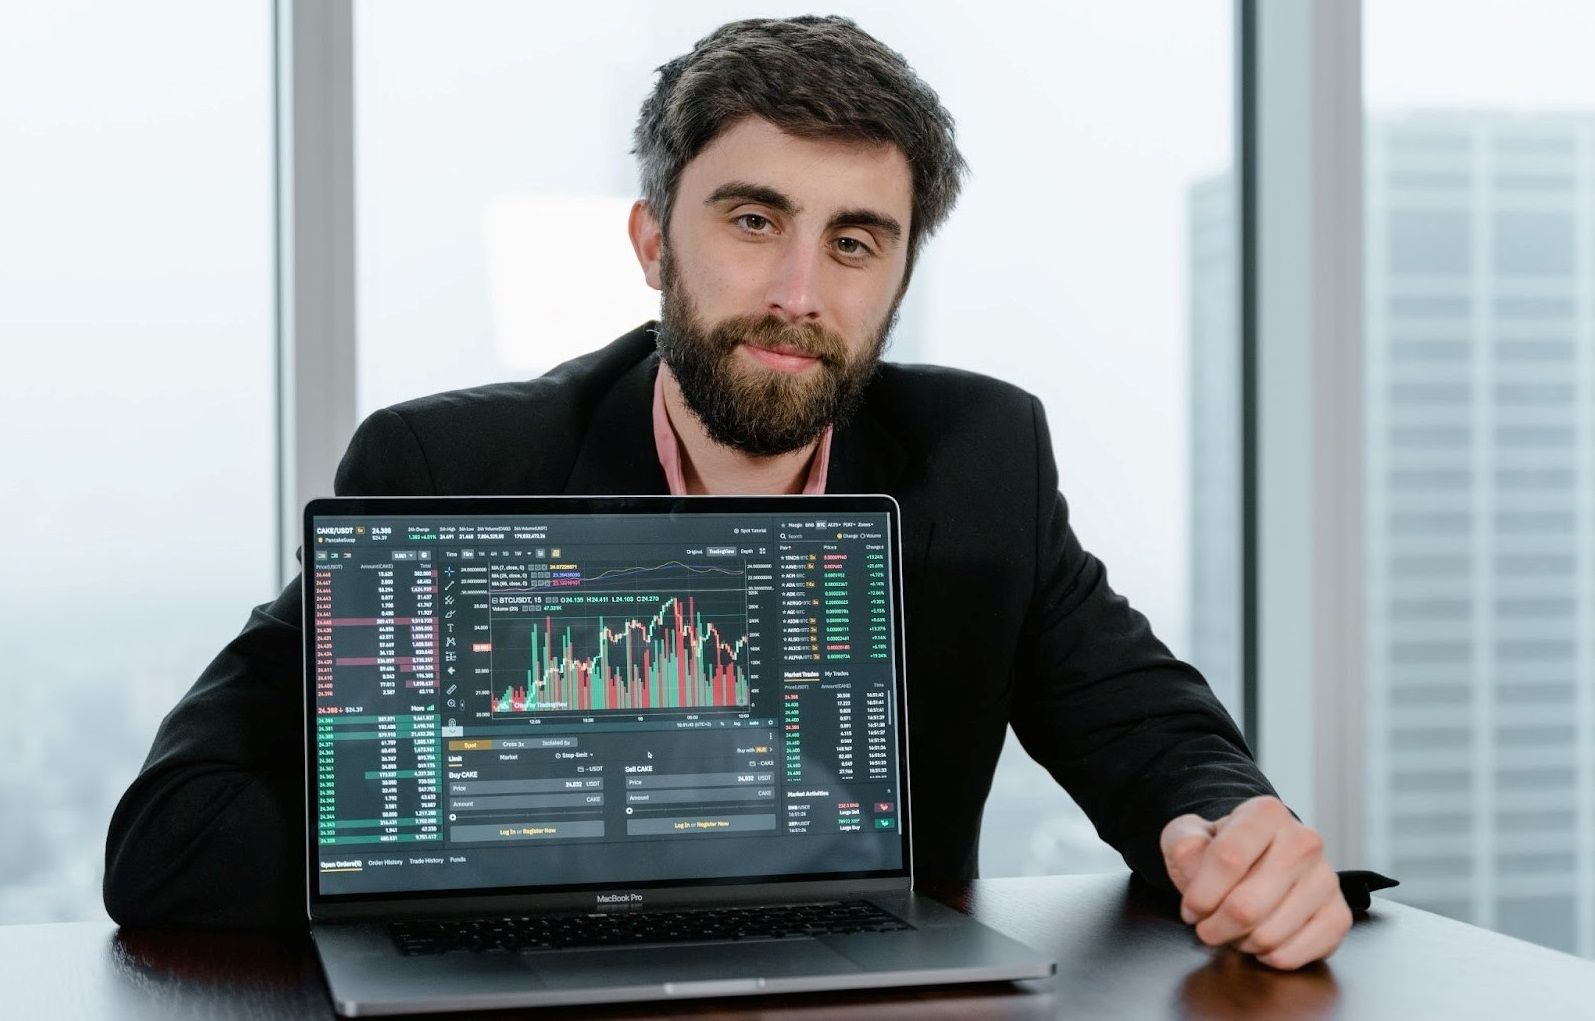 A man sitting behind a laptop screen that shows a crypto price chart